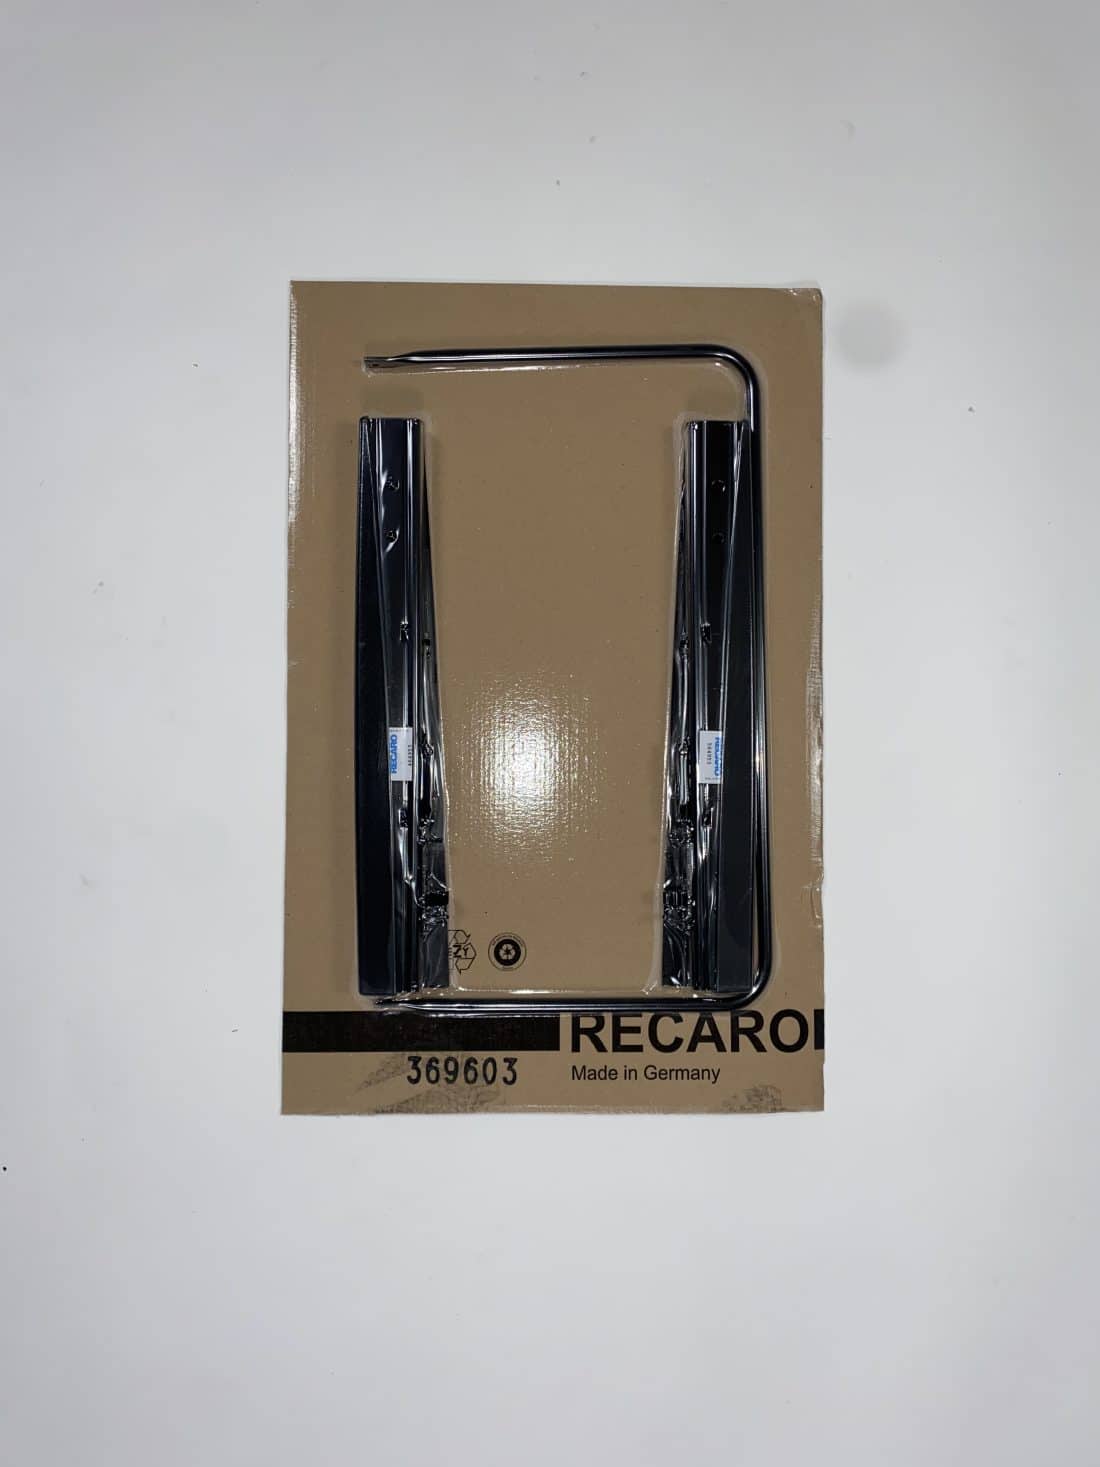 Trp Post Container Data Trp Post Id 12851 Recaro Universal Flat Slide Rails With Outside Bracket 369603 Trp Post Container